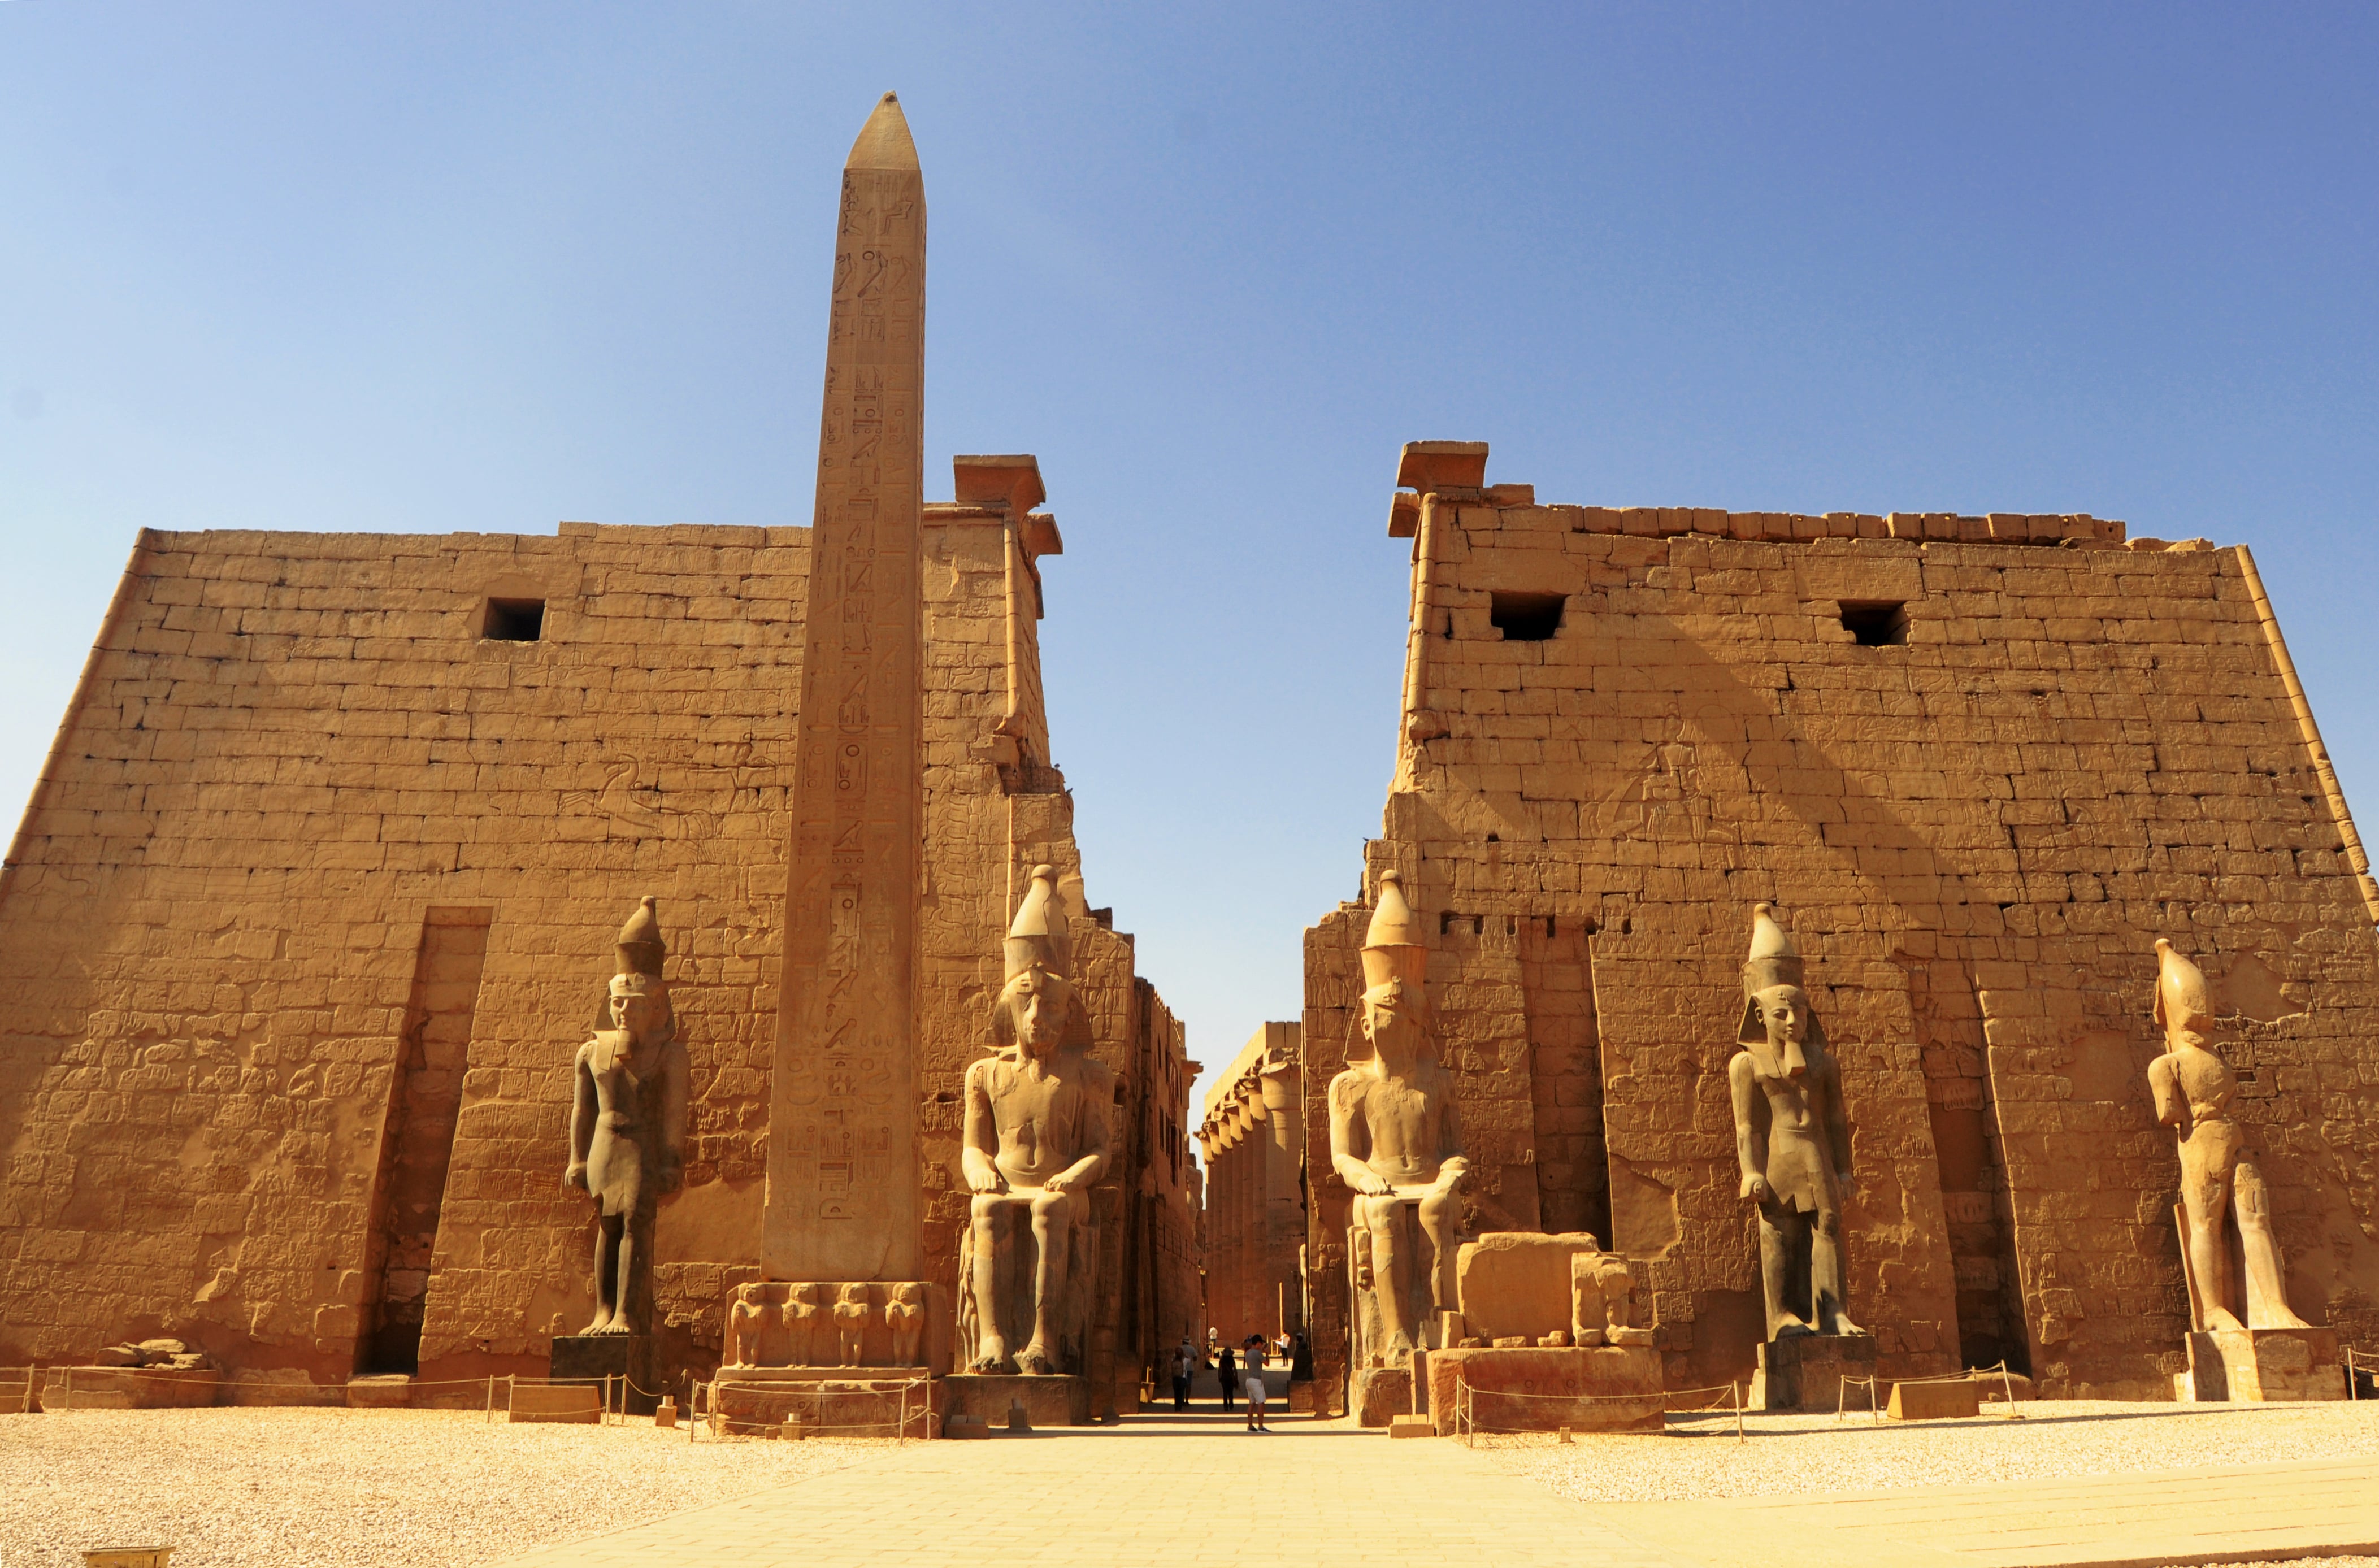 Luxor is often referred to as what?